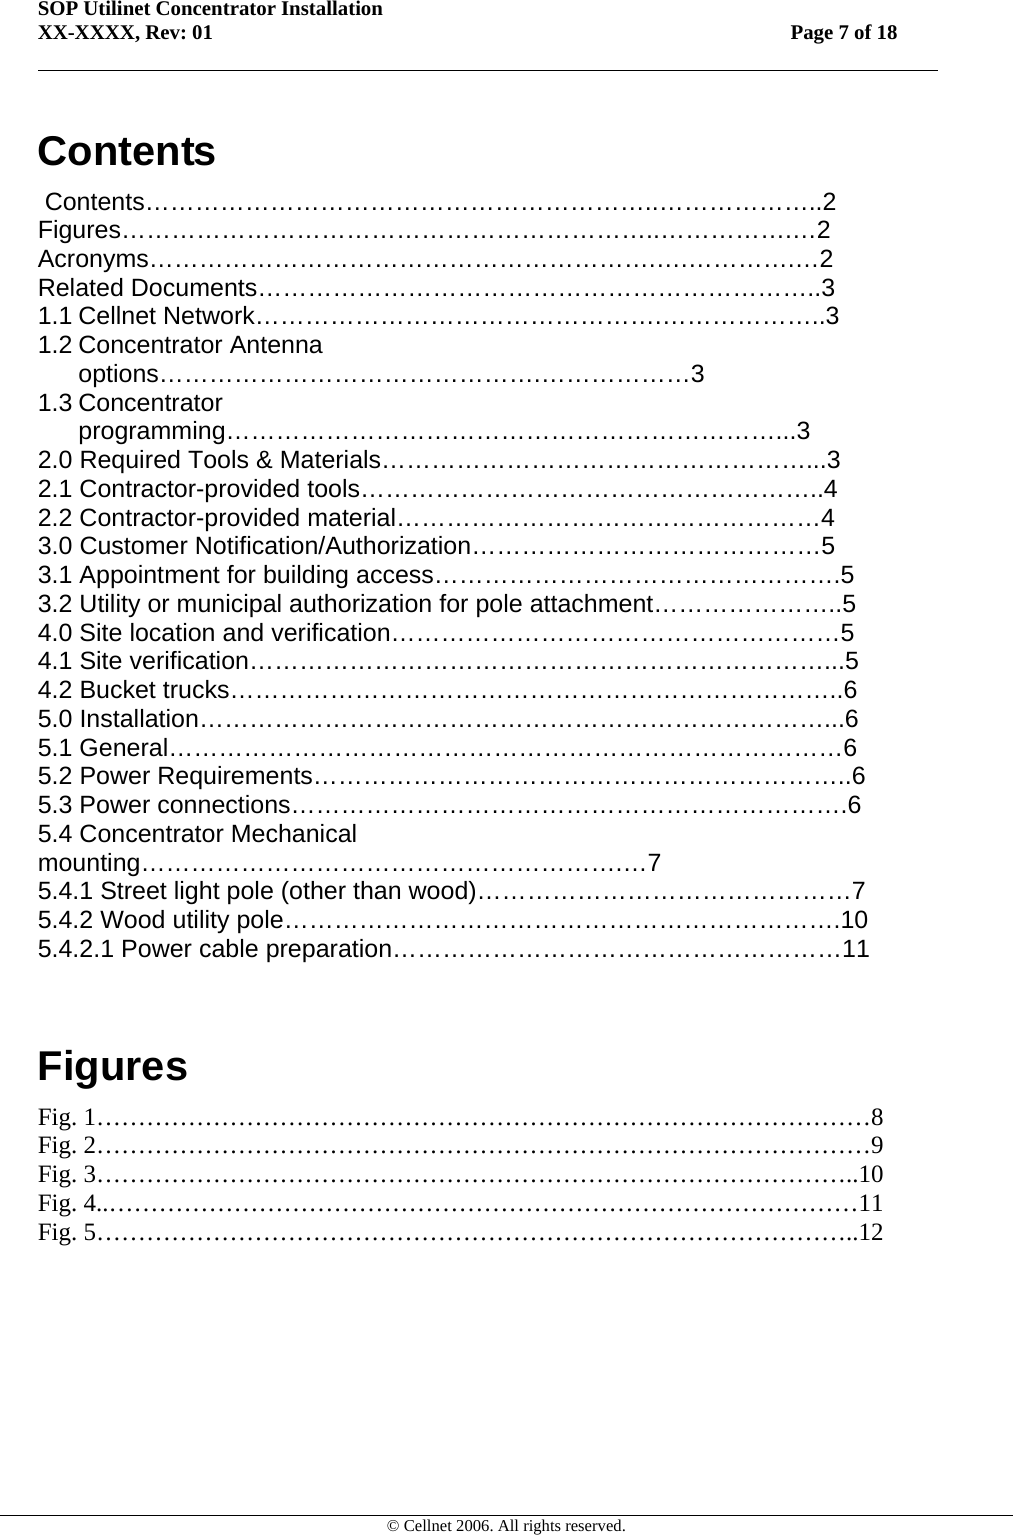 SOP Utilinet Concentrator Installation XX-XXXX, Rev: 01 Page 7 of 18         © Cellnet 2006. All rights reserved. Contents  Contents……………………………………………………..………………..2 Figures………………………………………………………..…………….…2 Acronyms…………………………………………………….….………….…2 Related Documents…………………………………………………………..3 1.1 Cellnet Network………………………………………….………………..3 1.2 Concentrator Antenna options……………………………………….………………3 1.3 Concentrator programming…………………………………………………………...3 2.0 Required Tools &amp; Materials……………………………………………...3 2.1 Contractor-provided tools………………………………………………..4 2.2 Contractor-provided material……………………………………………4 3.0 Customer Notification/Authorization……………………………………5 3.1 Appointment for building access………………………………………….5 3.2 Utility or municipal authorization for pole attachment…………………..5 4.0 Site location and verification………………………………………………5 4.1 Site verification……………………………………………………………...5 4.2 Bucket trucks………………………………………………………………..6 5.0 Installation…………………………………………………………………...6 5.1 General………………………………………………………………………6 5.2 Power Requirements………………………………………………………..6 5.3 Power connections………………………………………………………….6 5.4 Concentrator Mechanical mounting………………………………………………….…7 5.4.1 Street light pole (other than wood)………………………………………7 5.4.2 Wood utility pole………………………………………………………….10 5.4.2.1 Power cable preparation………………………………………………11  Figures Fig. 1…………………………………………………………………………………8 Fig. 2…………………………………………………………………………………9 Fig. 3………………………………………………………………………………..10 Fig. 4..………………………………………………………………………………11 Fig. 5………………………………………………………………………………..12 